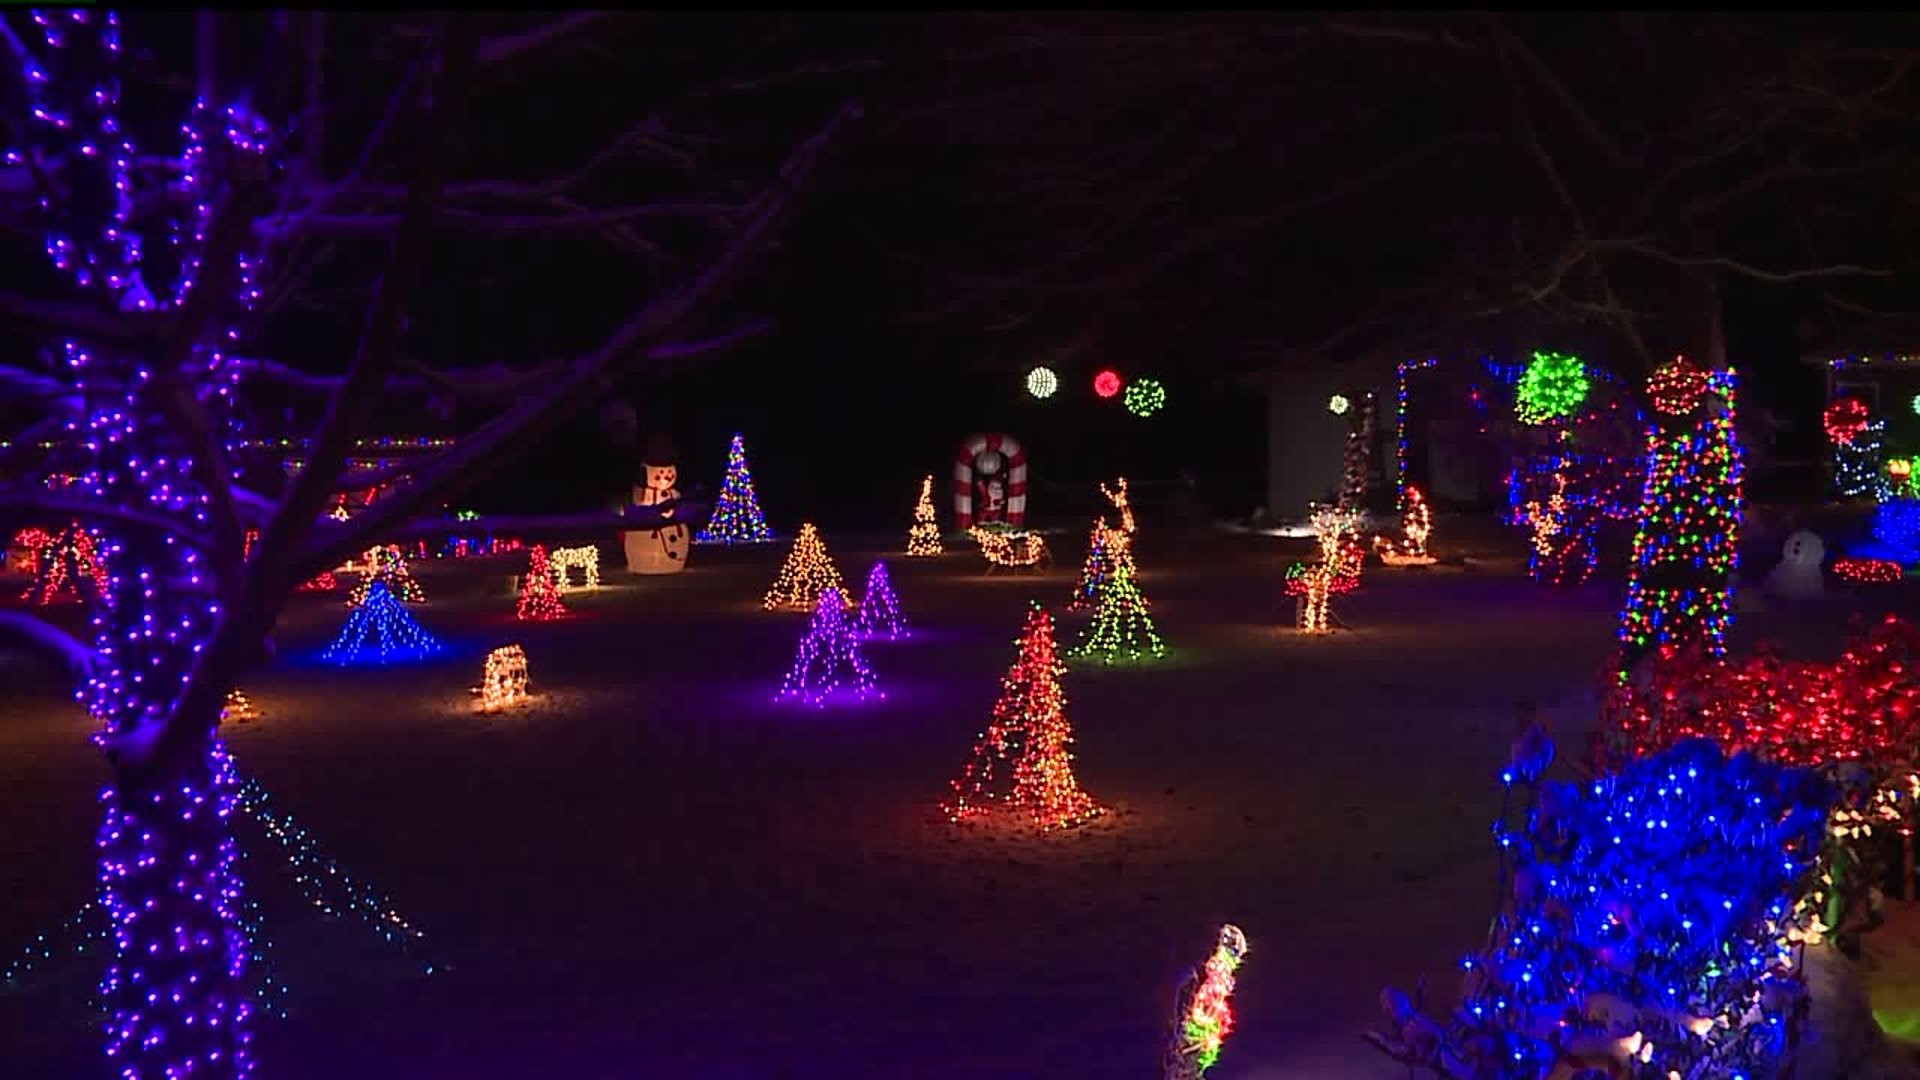 Light display raises funds for Pennsylvania Wounded Warriors